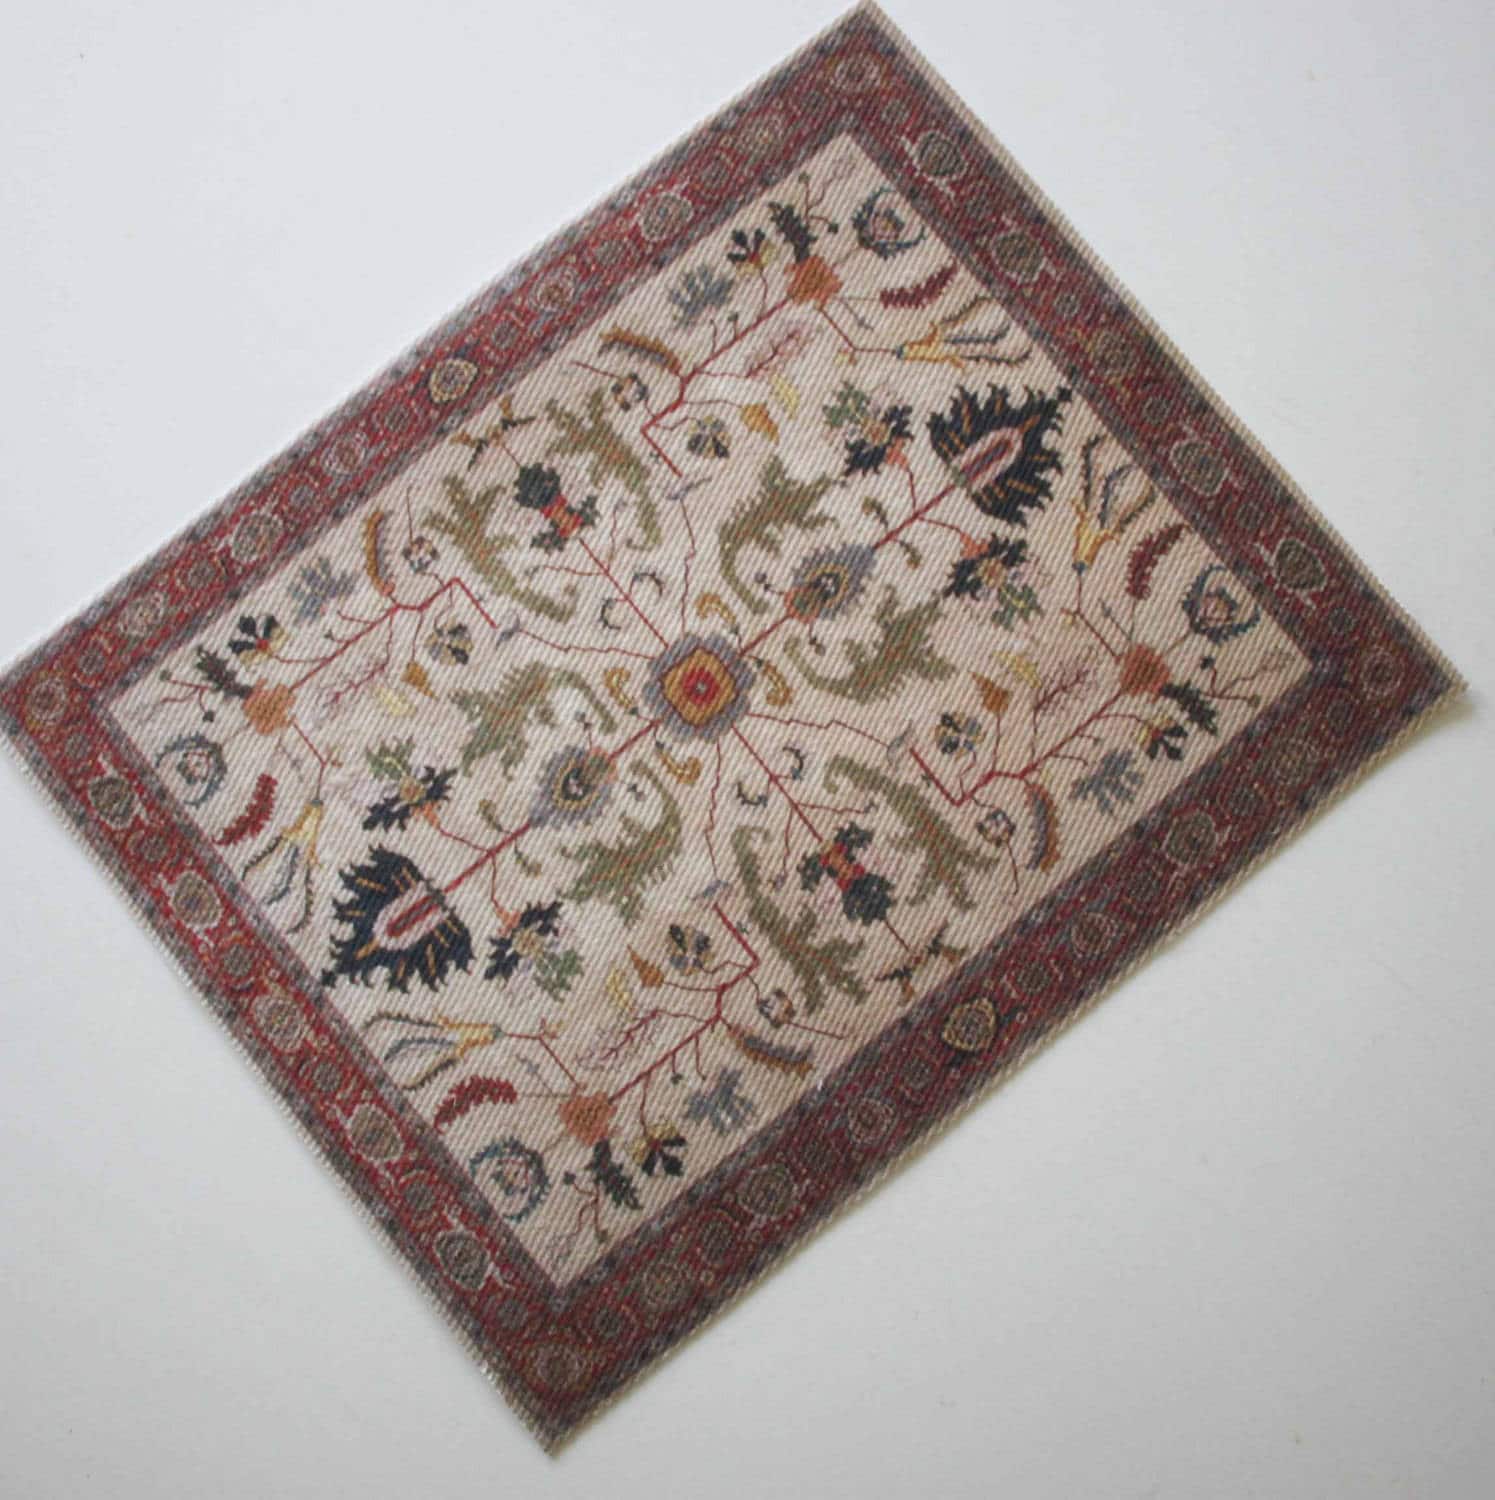 Rug  41S  miniature dollhouse woven carpet 1pc 1/12 scale made in Turkey fabric 